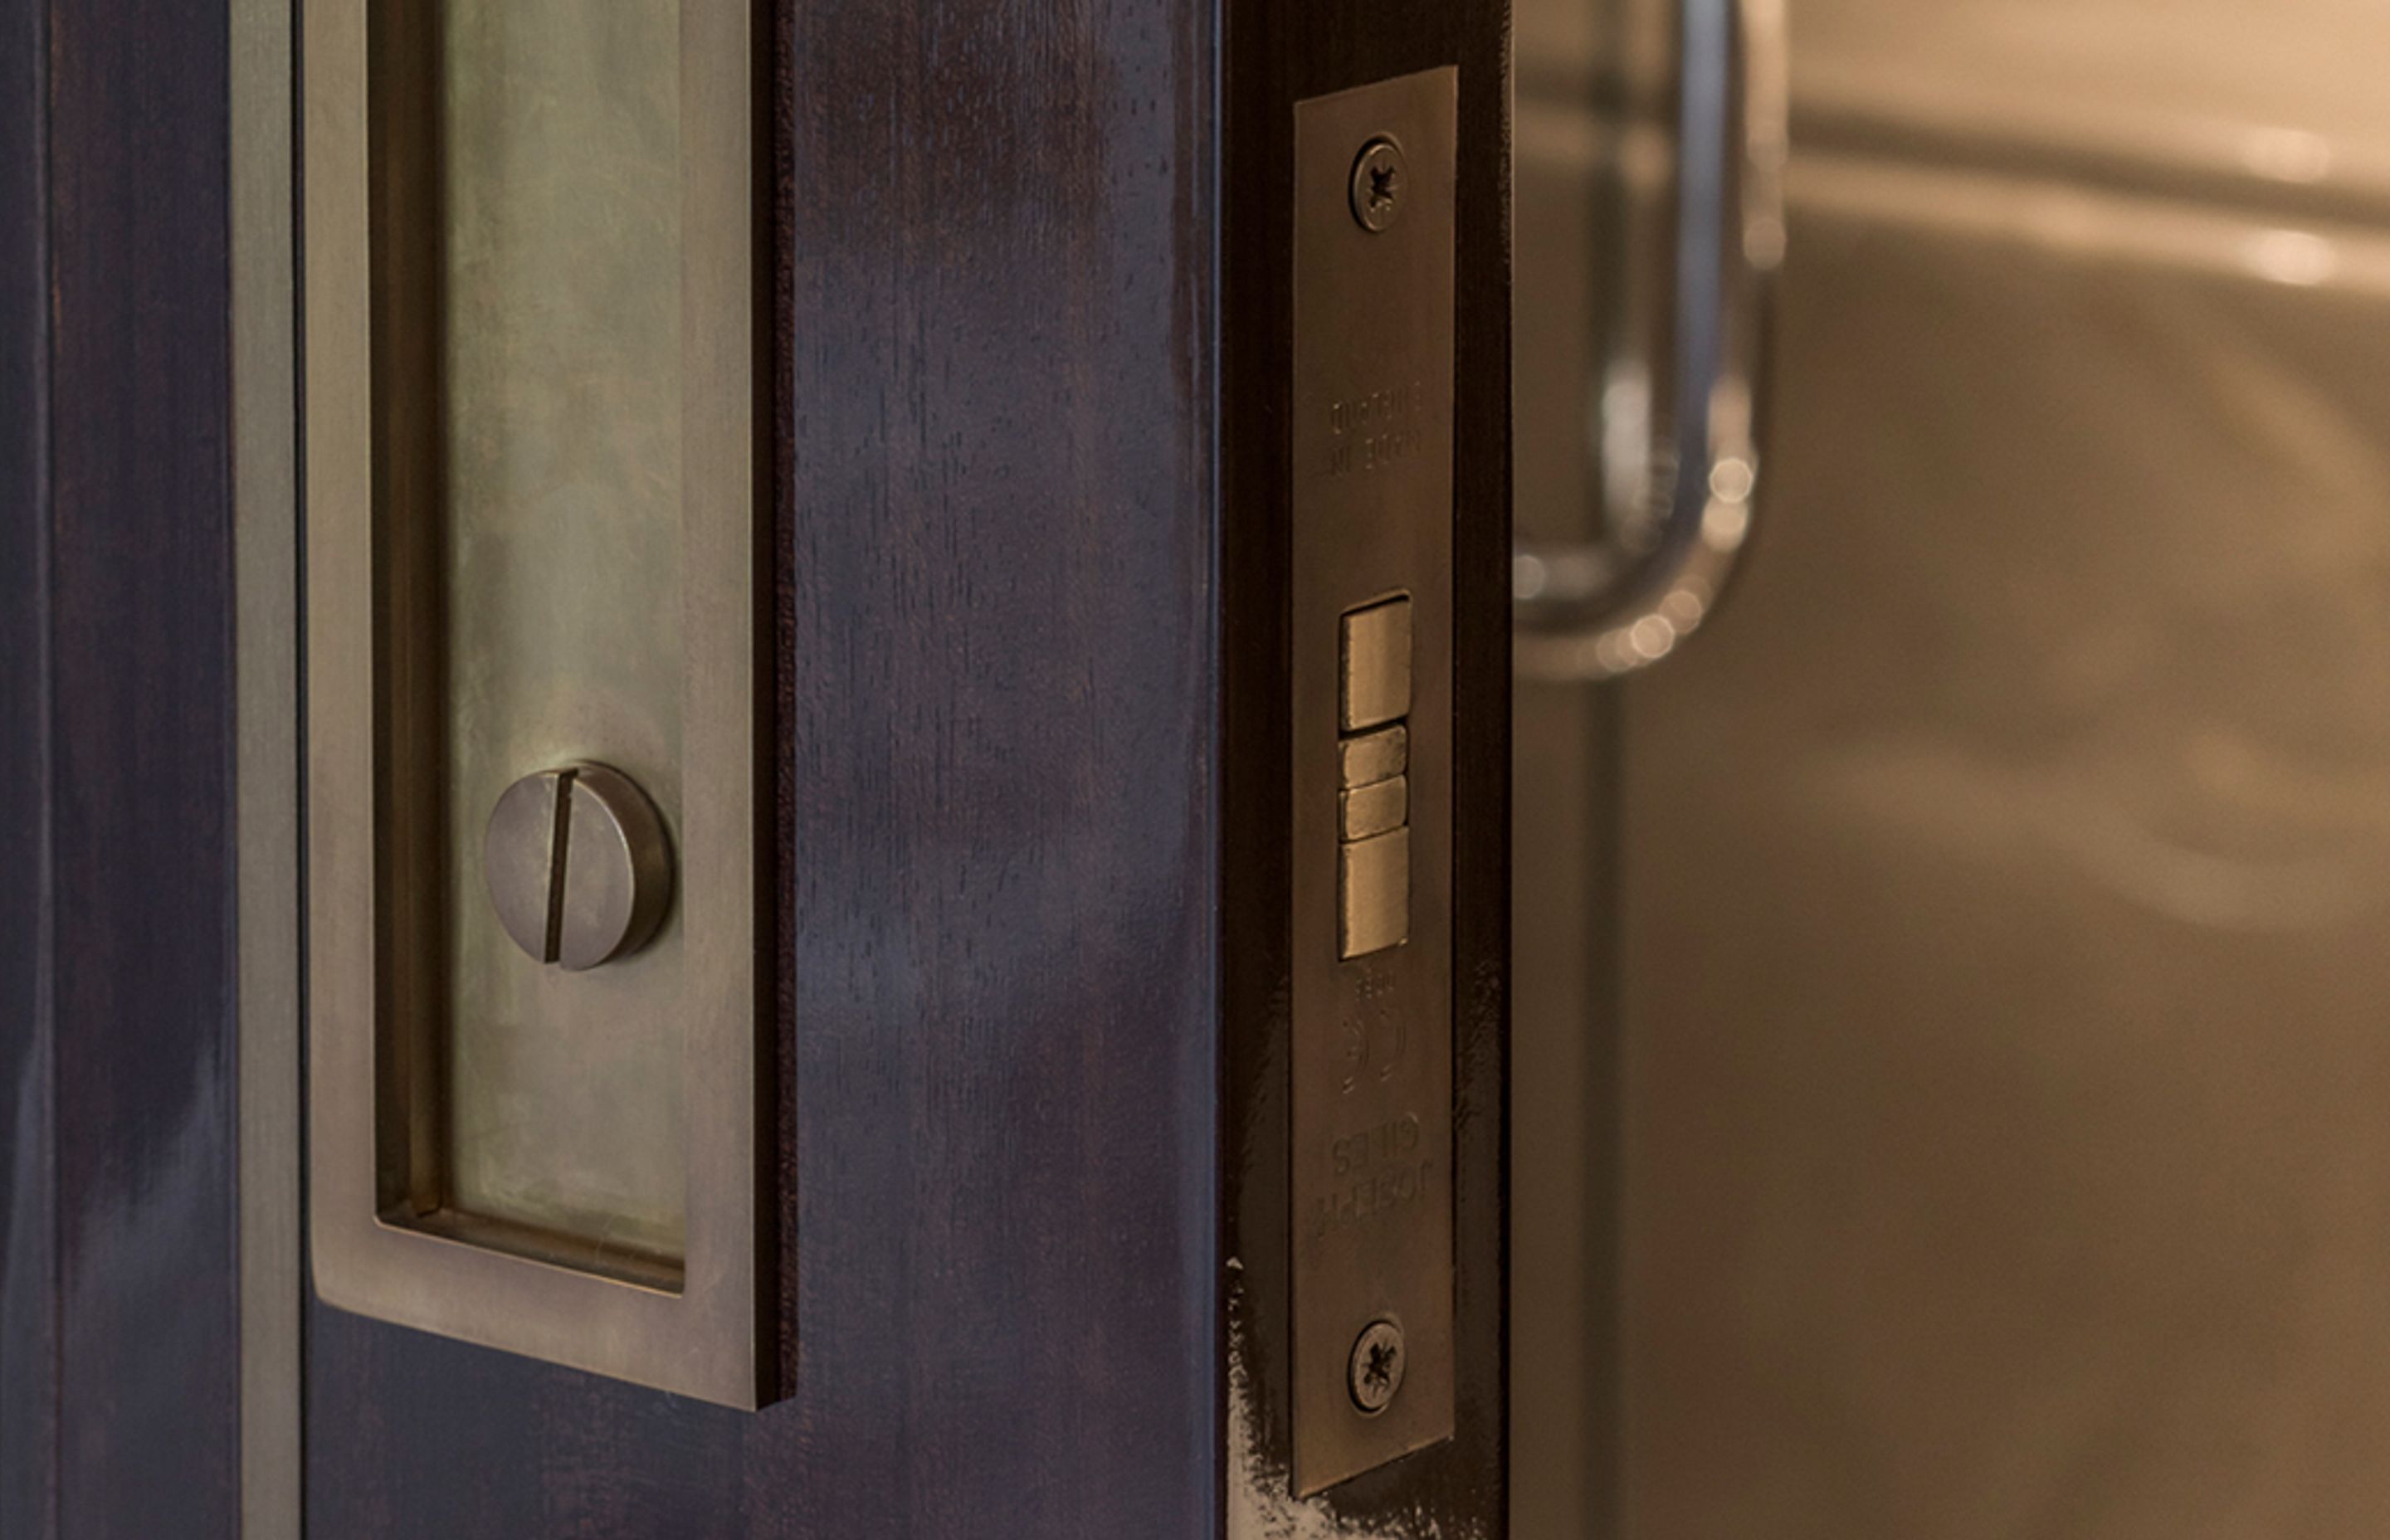 As well has the range of door knobs and levers, Joseph Giles offers a collection of hinged and sliding door latches and locks, which of course come in the same finish as the knobs and levers.